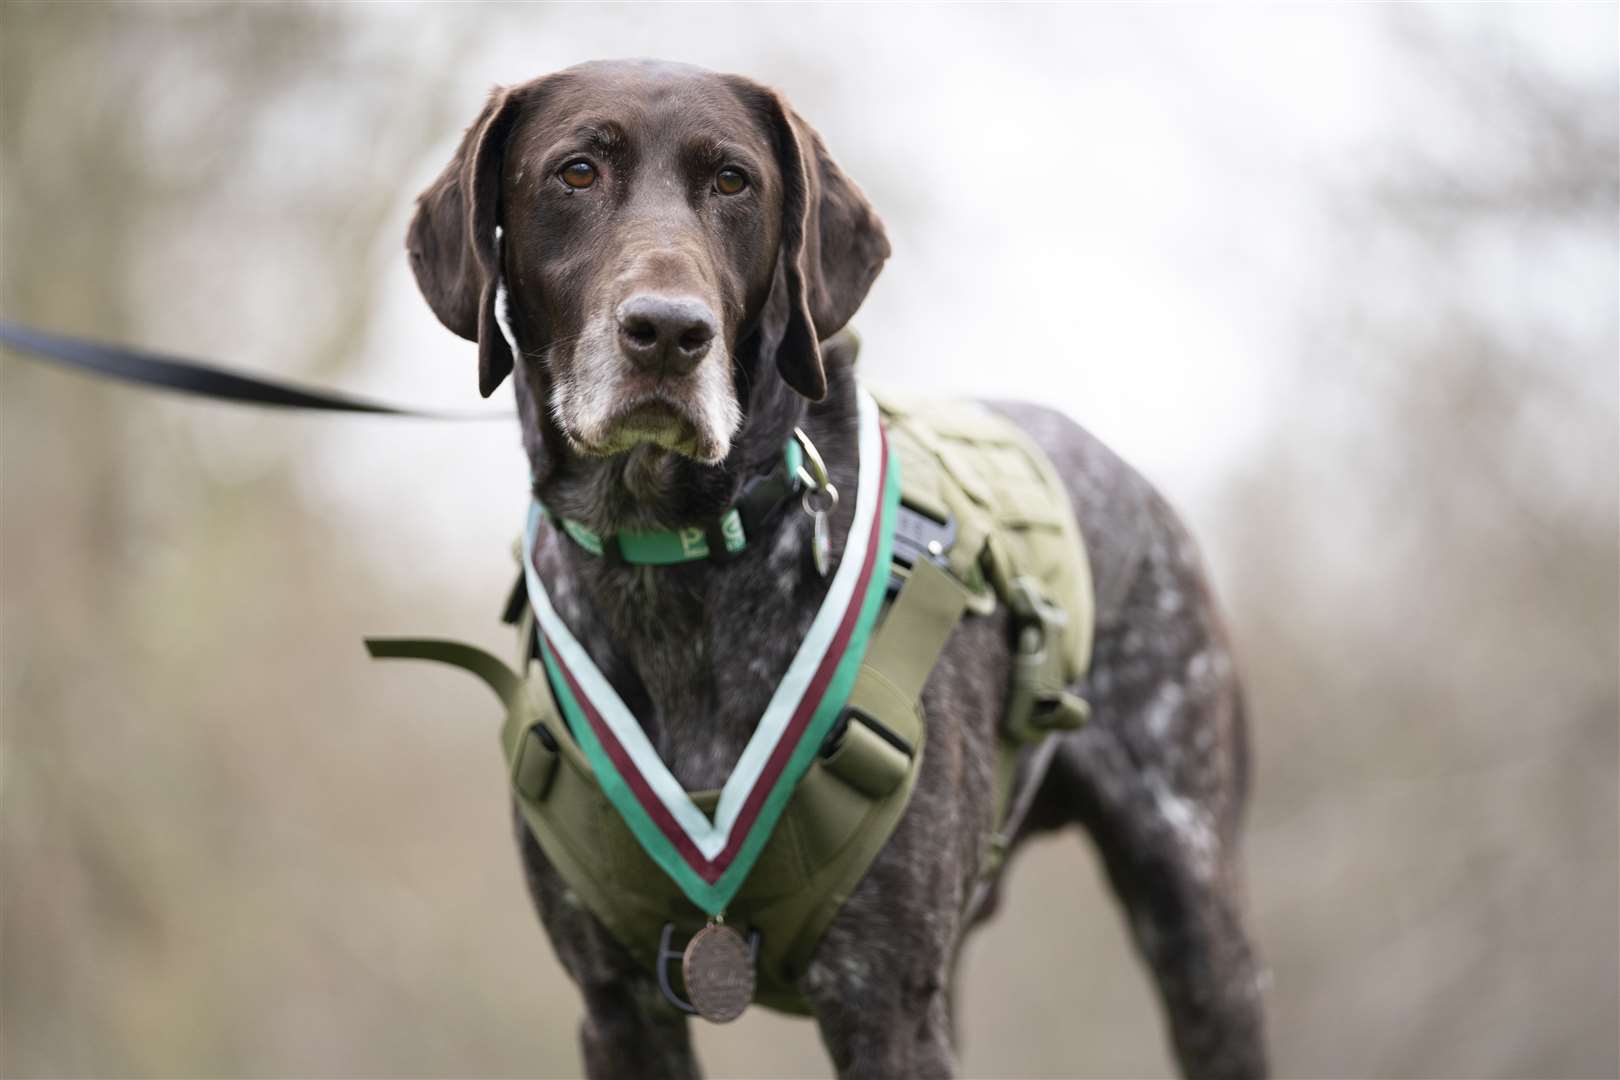 Retired RAF Police sniffer dog Hertz was awarded the People’s Dispensary for Sick Animals’ Dickin Medal for finding more than 100 items which posed a threat to the lives of service personnel and civilians in Afghanistan (Kirsty O’Connor/PA)